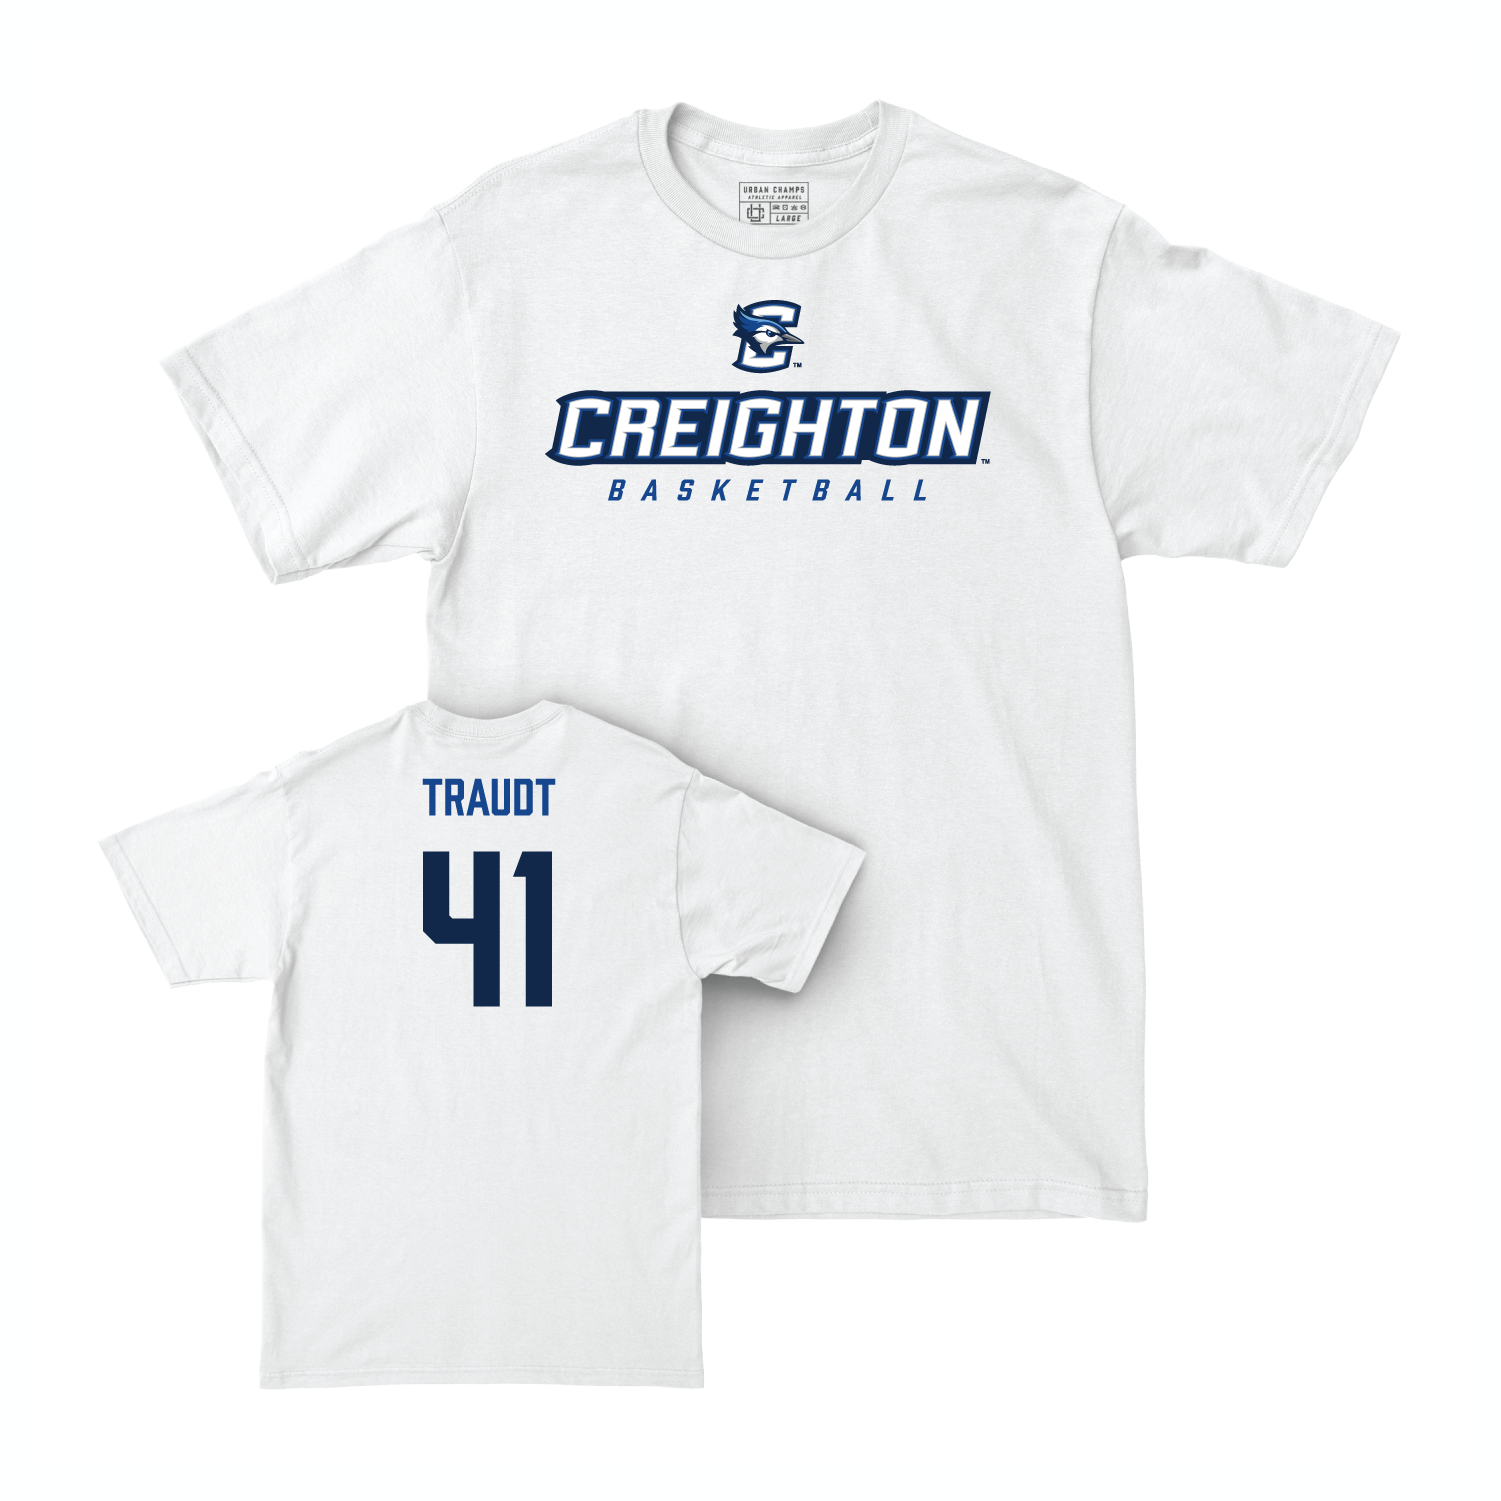 Creighton Men's Basketball White Athletic Comfort Colors Tee - Isaac Traudt Youth Small